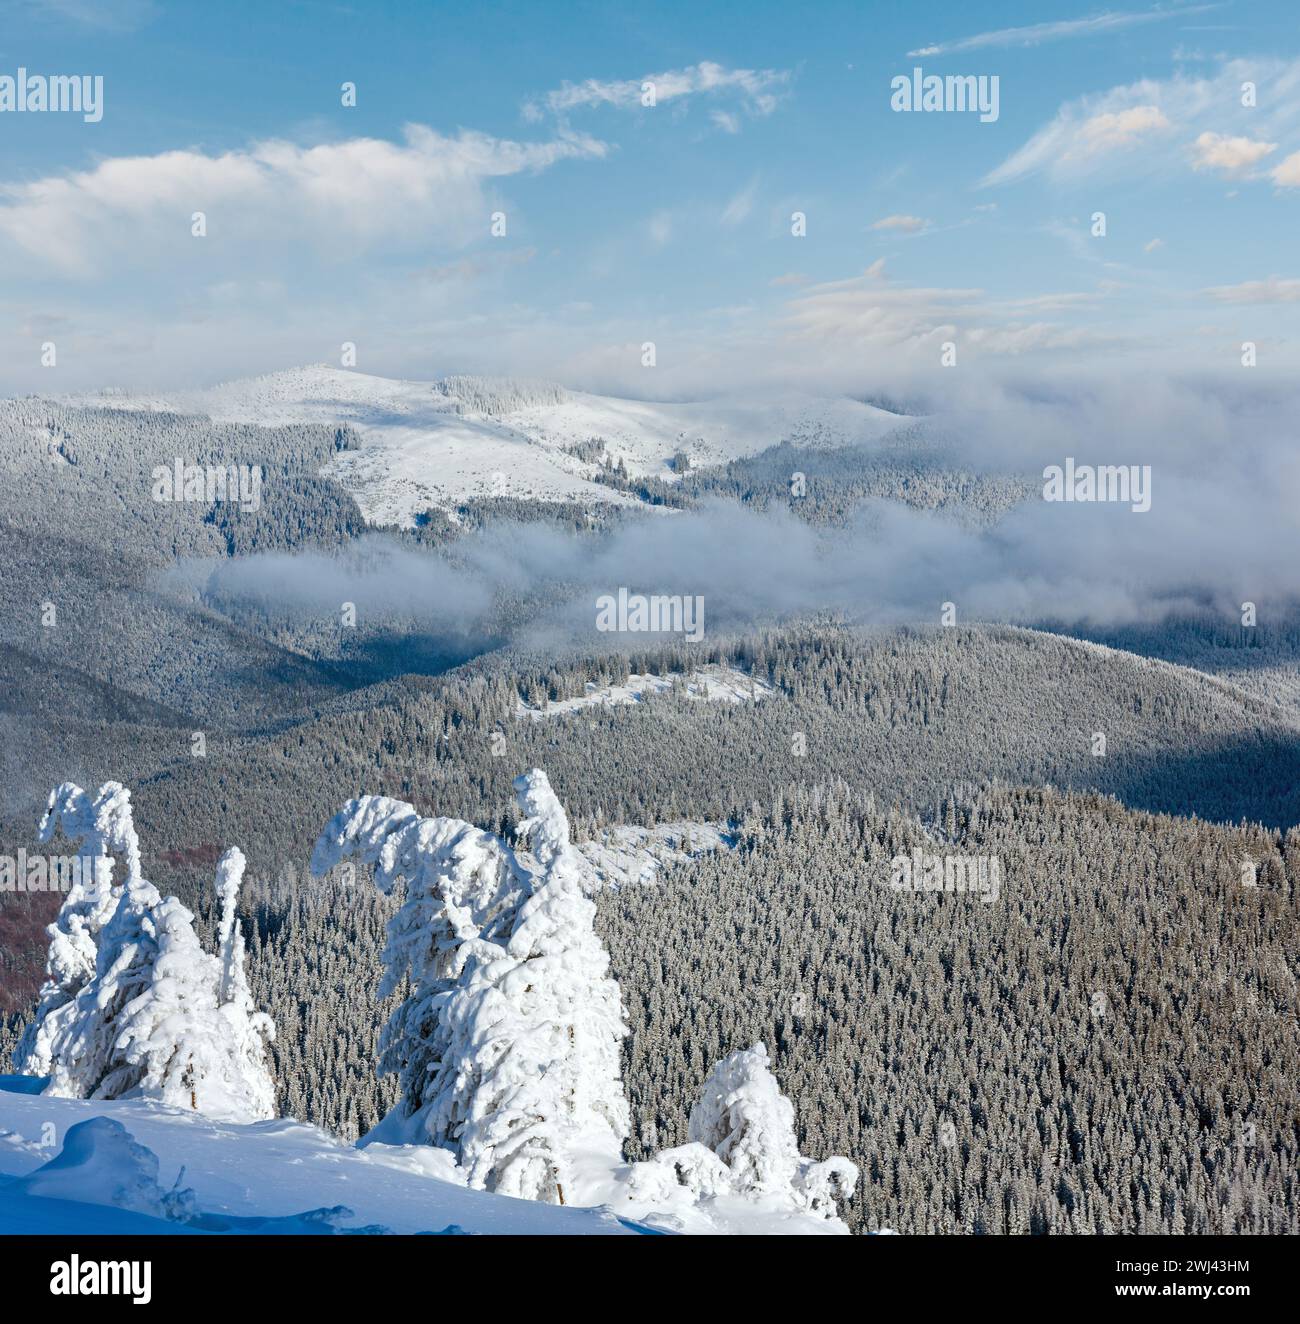 Winter mountain landscape with snowy trees Stock Photo